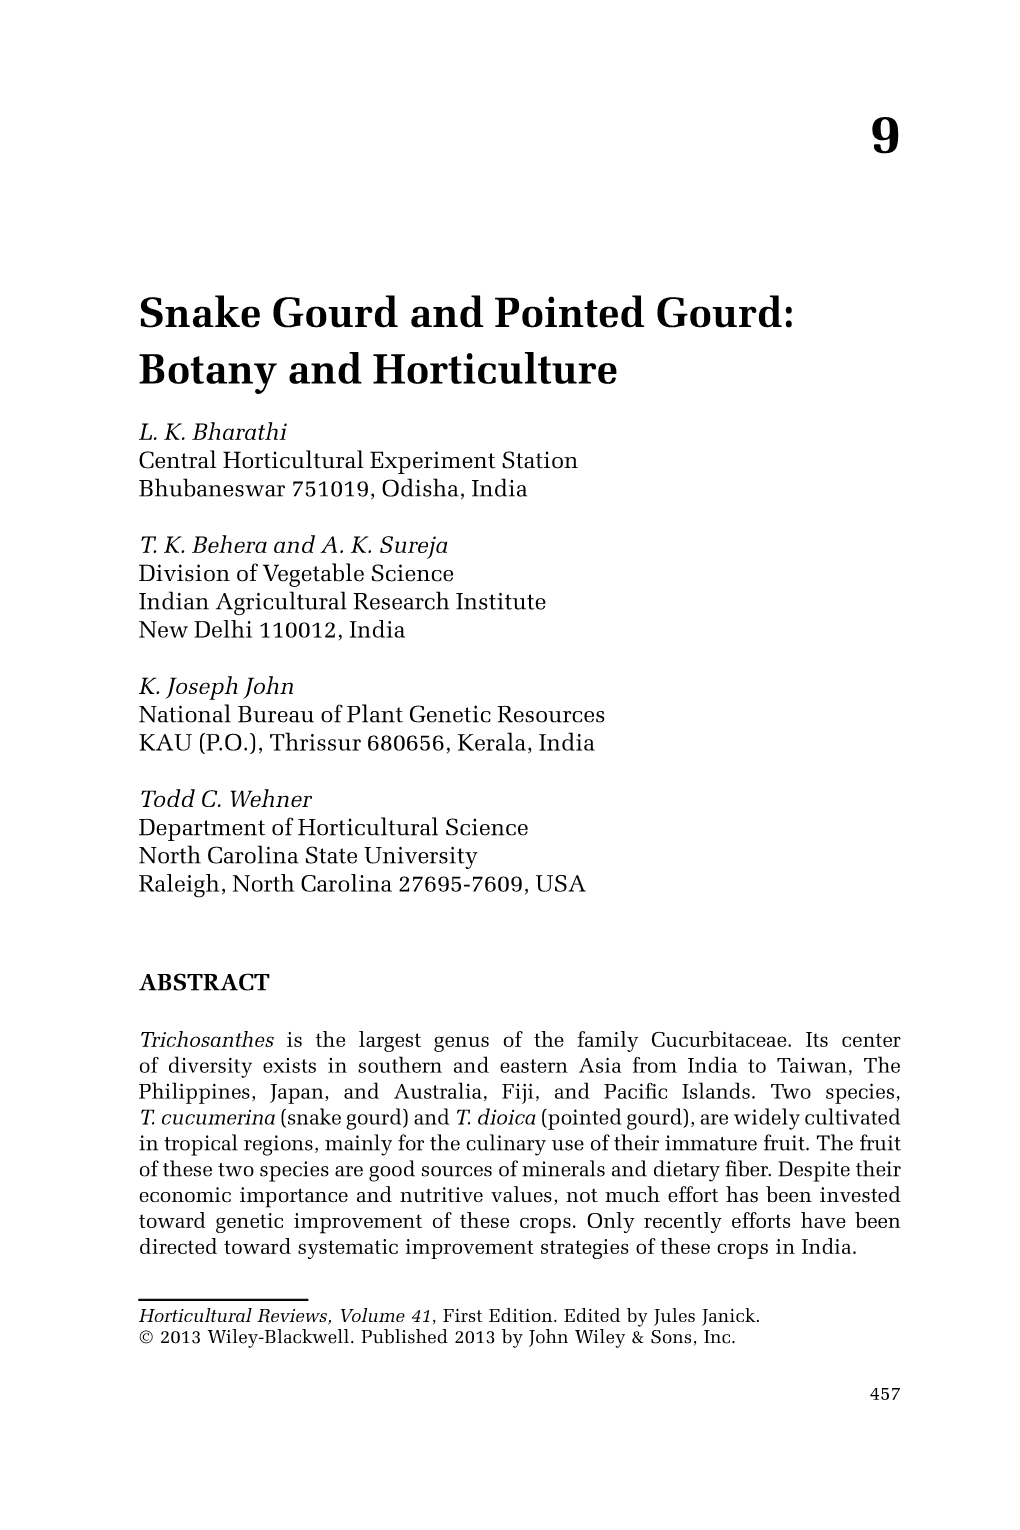 Snake Gourd and Pointed Gourd: Botany and Horticulture